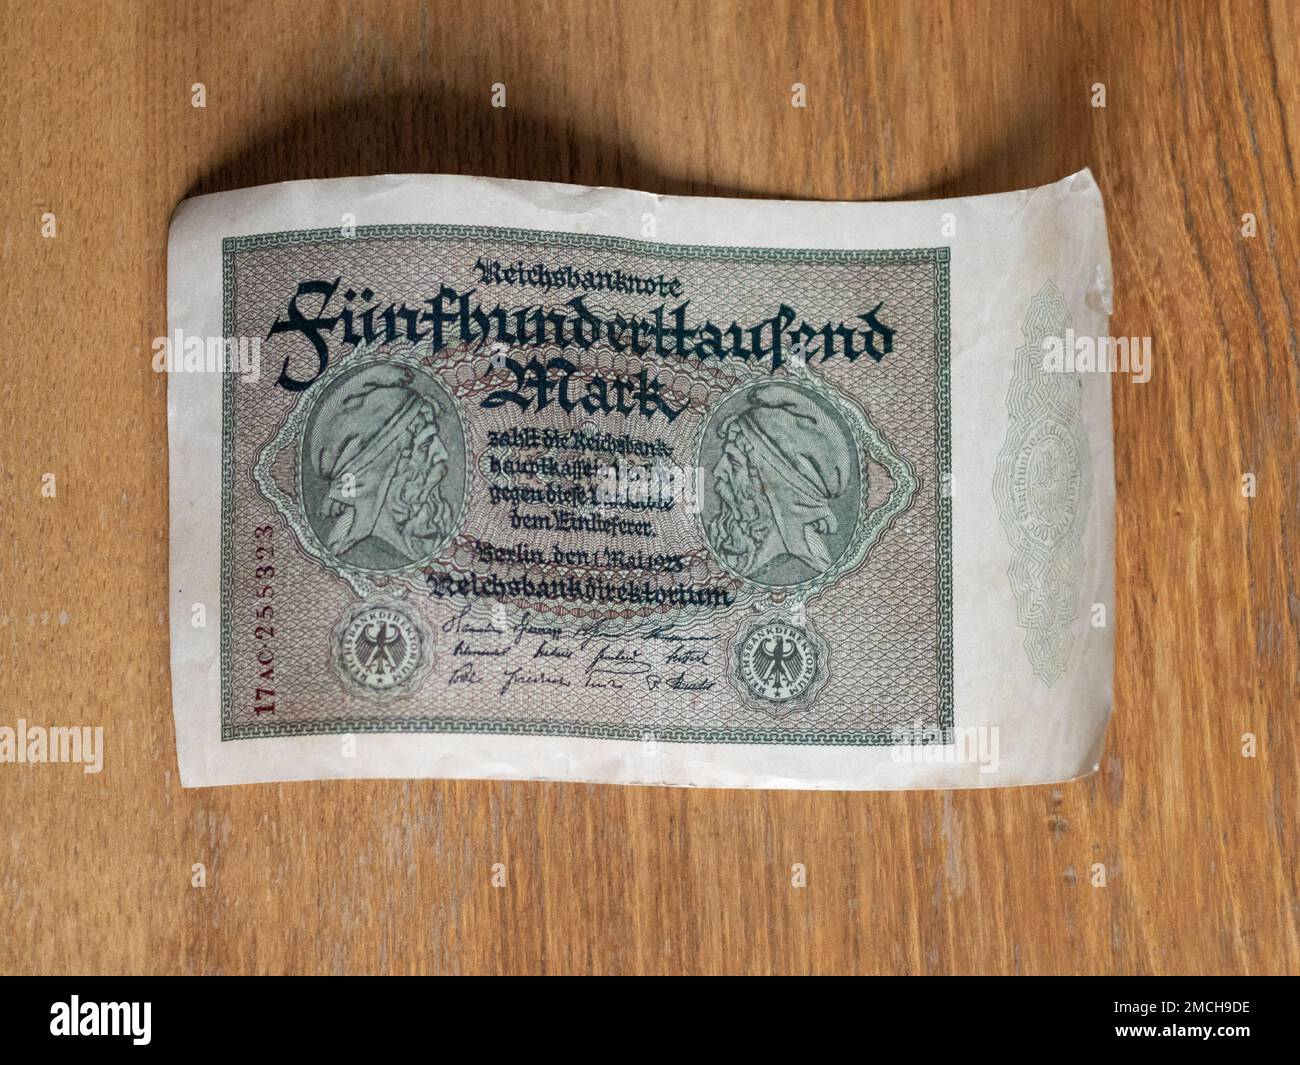 Reichsbanknote with the value of 500.000 Mark during the hyperinflation in 1923. Historic money in Germany when the bank printed a lot of banknotes. Stock Photo